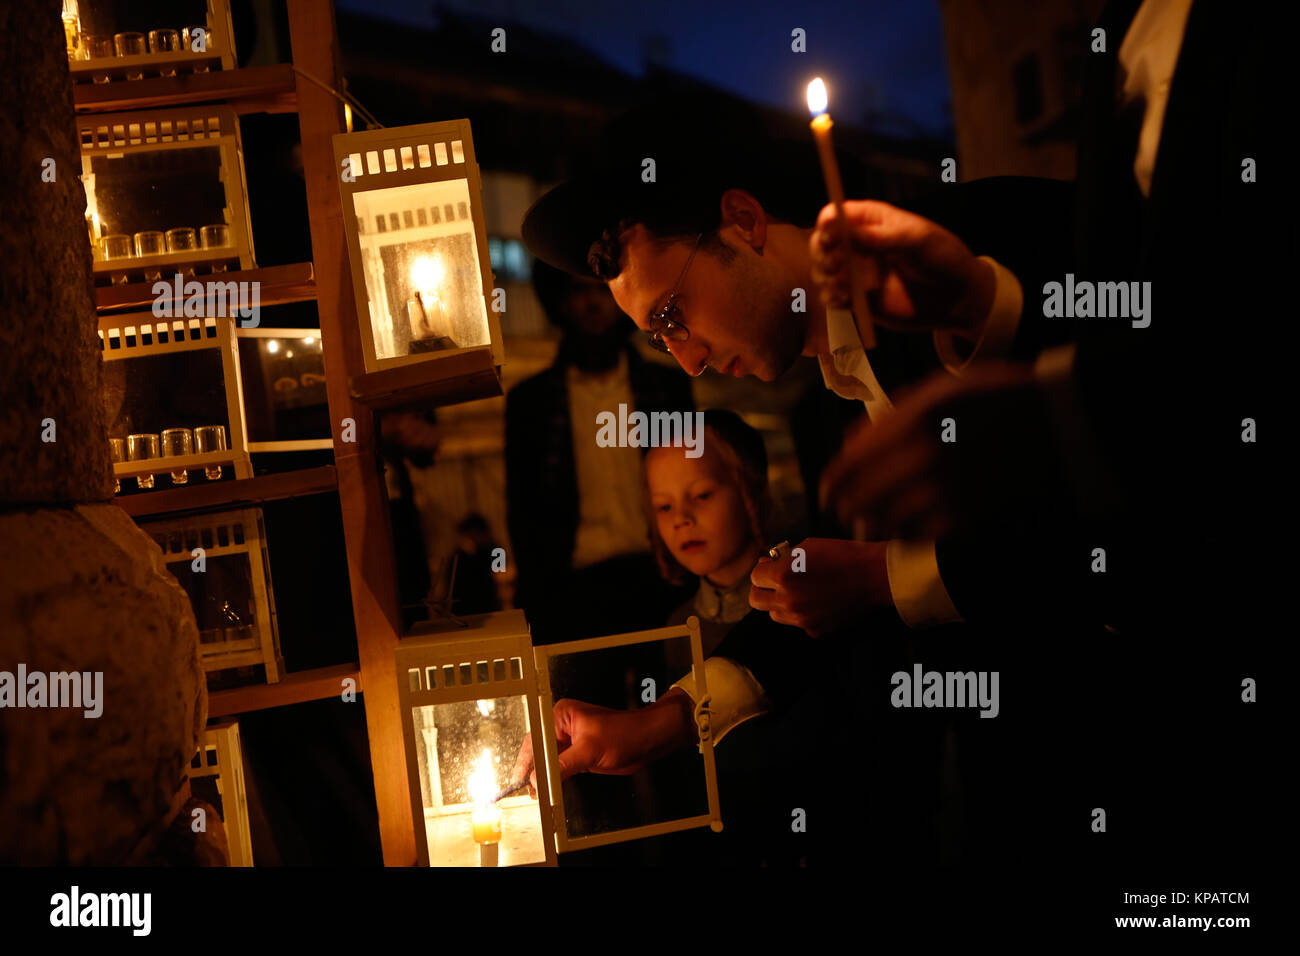 Jerusalem. 14th Dec, 2017. An ultra-Orthodox Jewish man lights a candle during Hanukkah in Mea Shearim neighborhood in Jerusalem, on Dec. 14, 2017. Hanukkah, also known as the Festival of Lights and Feast of Dedication, is an eight-day Jewish holiday commemorating the rededication of the Holy Temple (the Second Temple) in Jerusalem at the time of the Maccabean Revolt against the Seleucid Empire of the 2nd Century B.C. Credit: Gil Cohen Magen/Xinhua/Alamy Live News Stock Photo